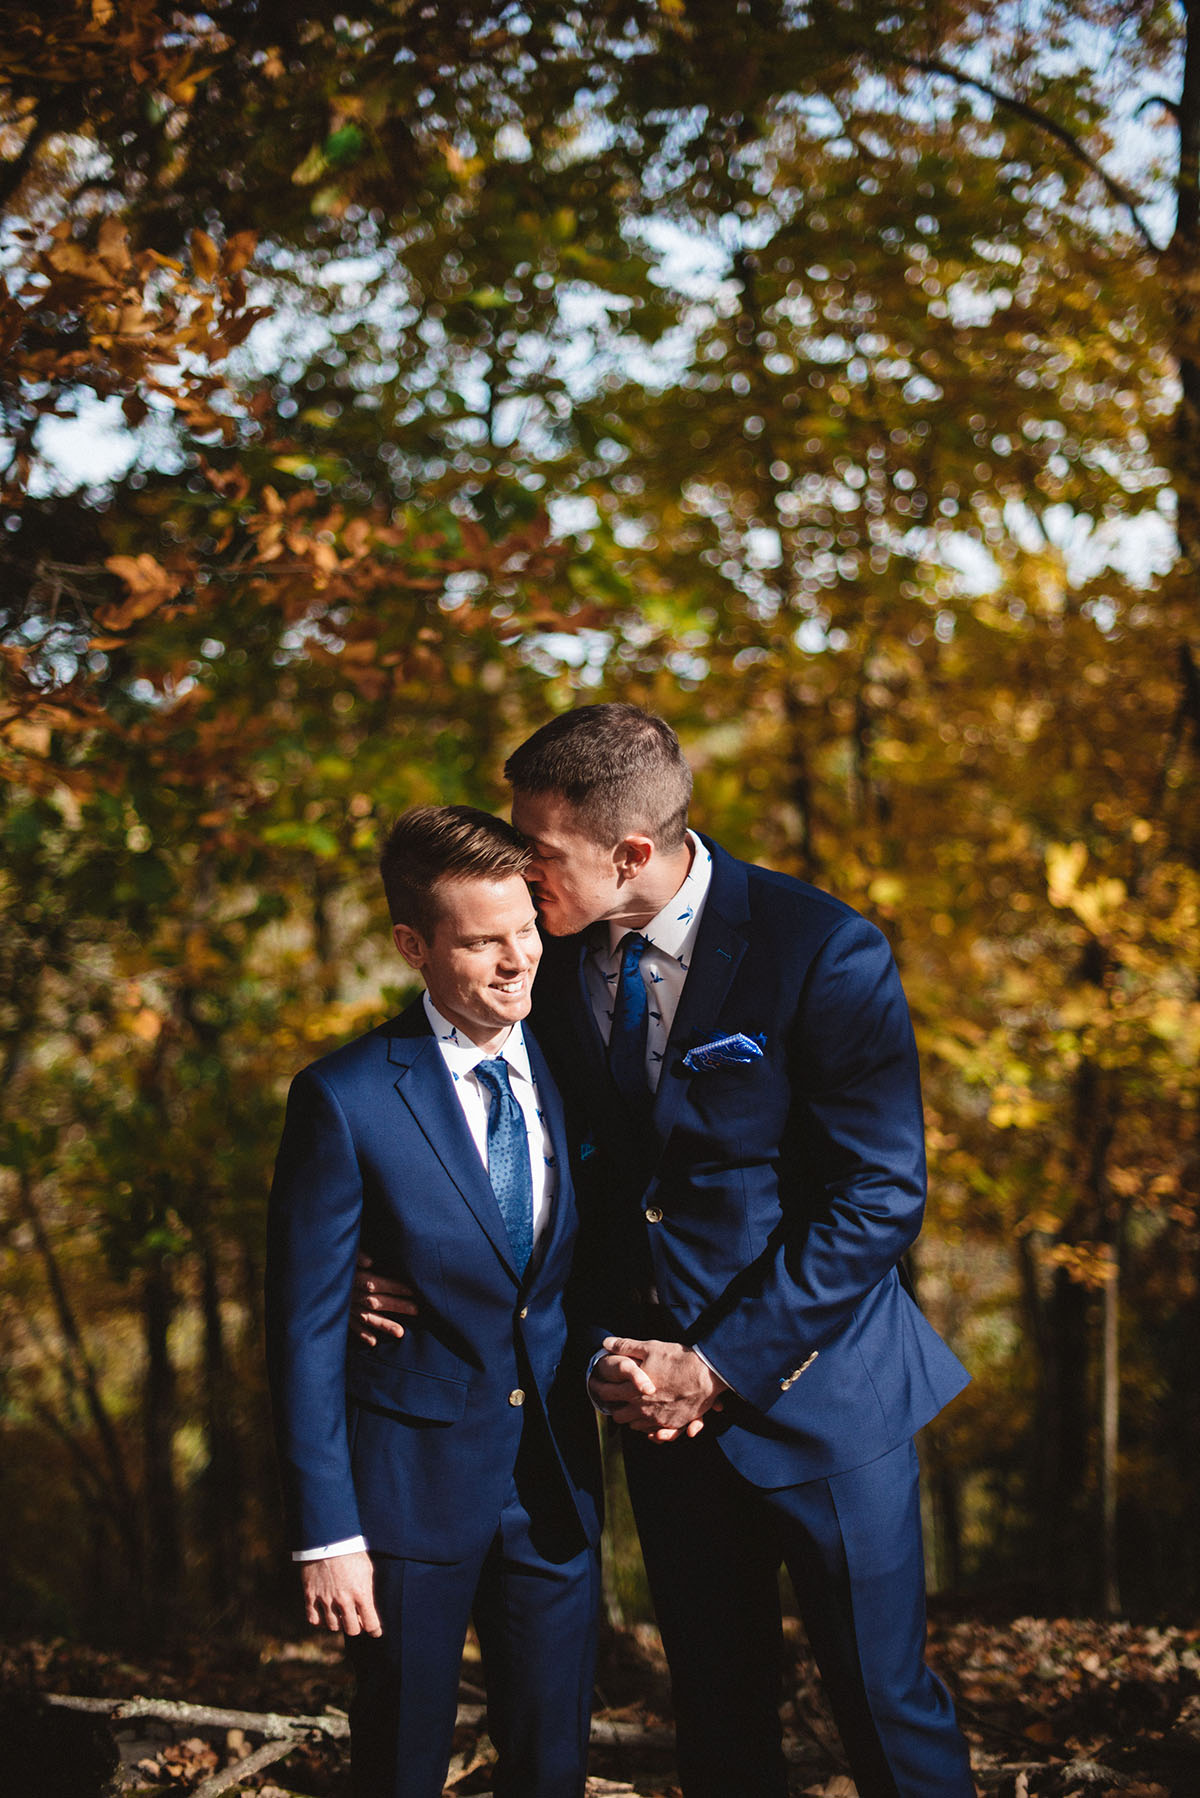 This astronomer's celestial-inspired wedding is literally out of this world Dyer Observatory navy blue tuxedos space constellations stars astronomy telescope autumn kiss